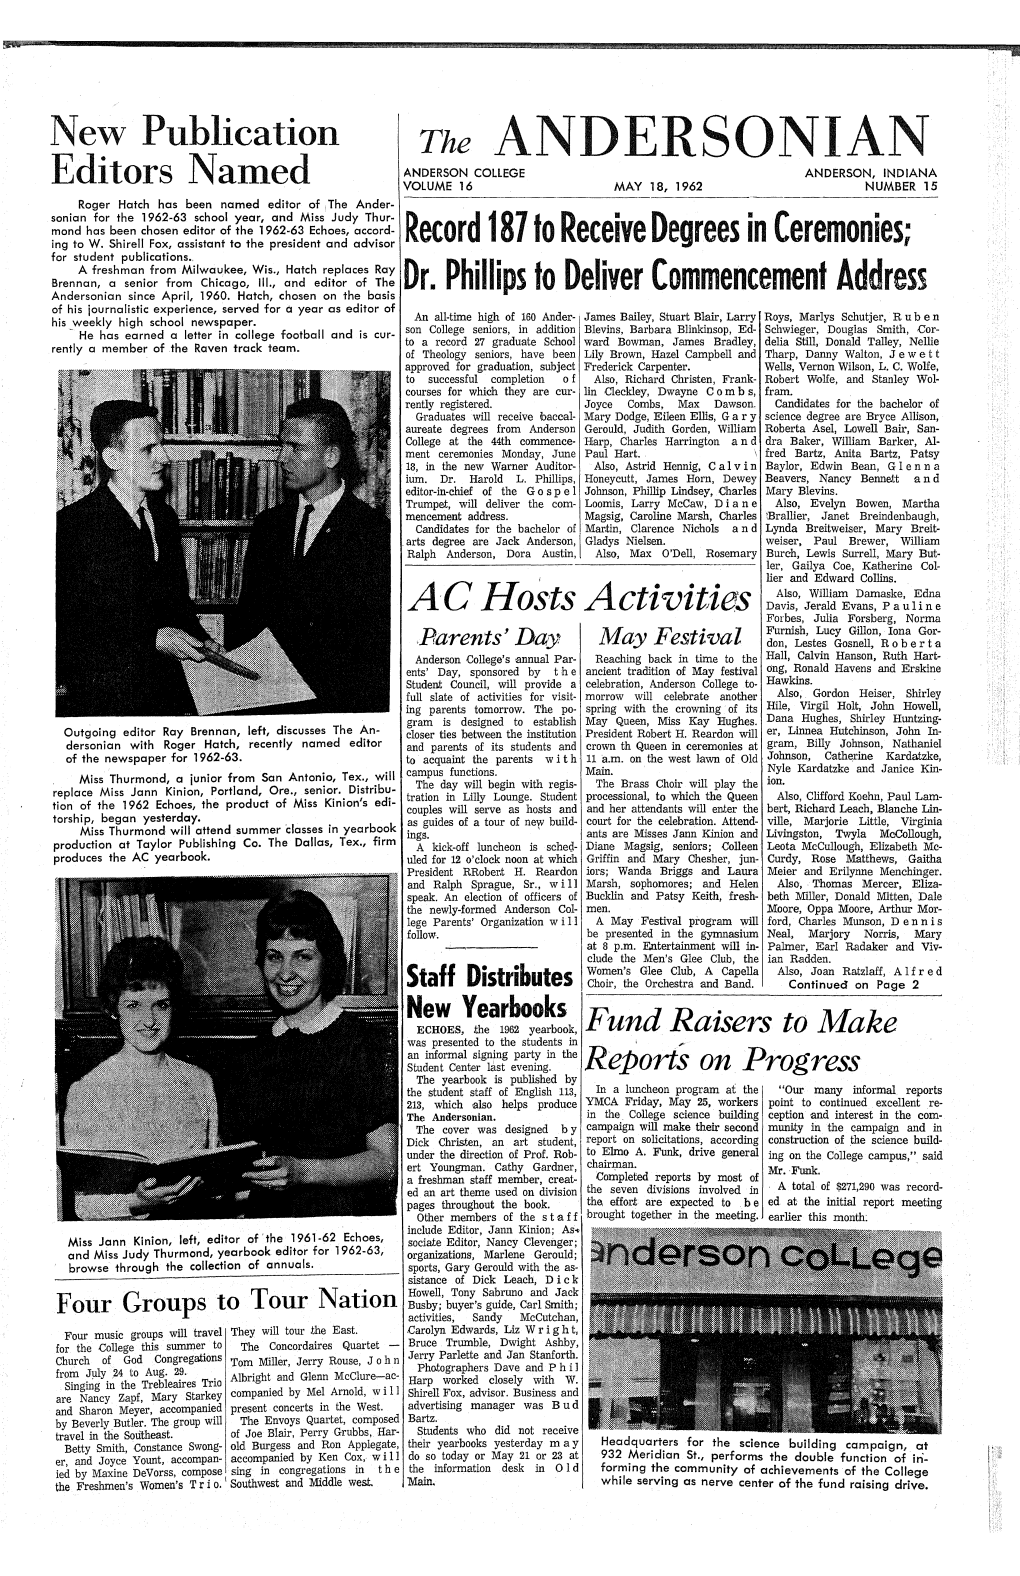 The ANDERSONIAN ANDERSON College ANDERSON, INDIANA Editors Named VOLUME 16 MAY 18, 1962 NUMBER 15